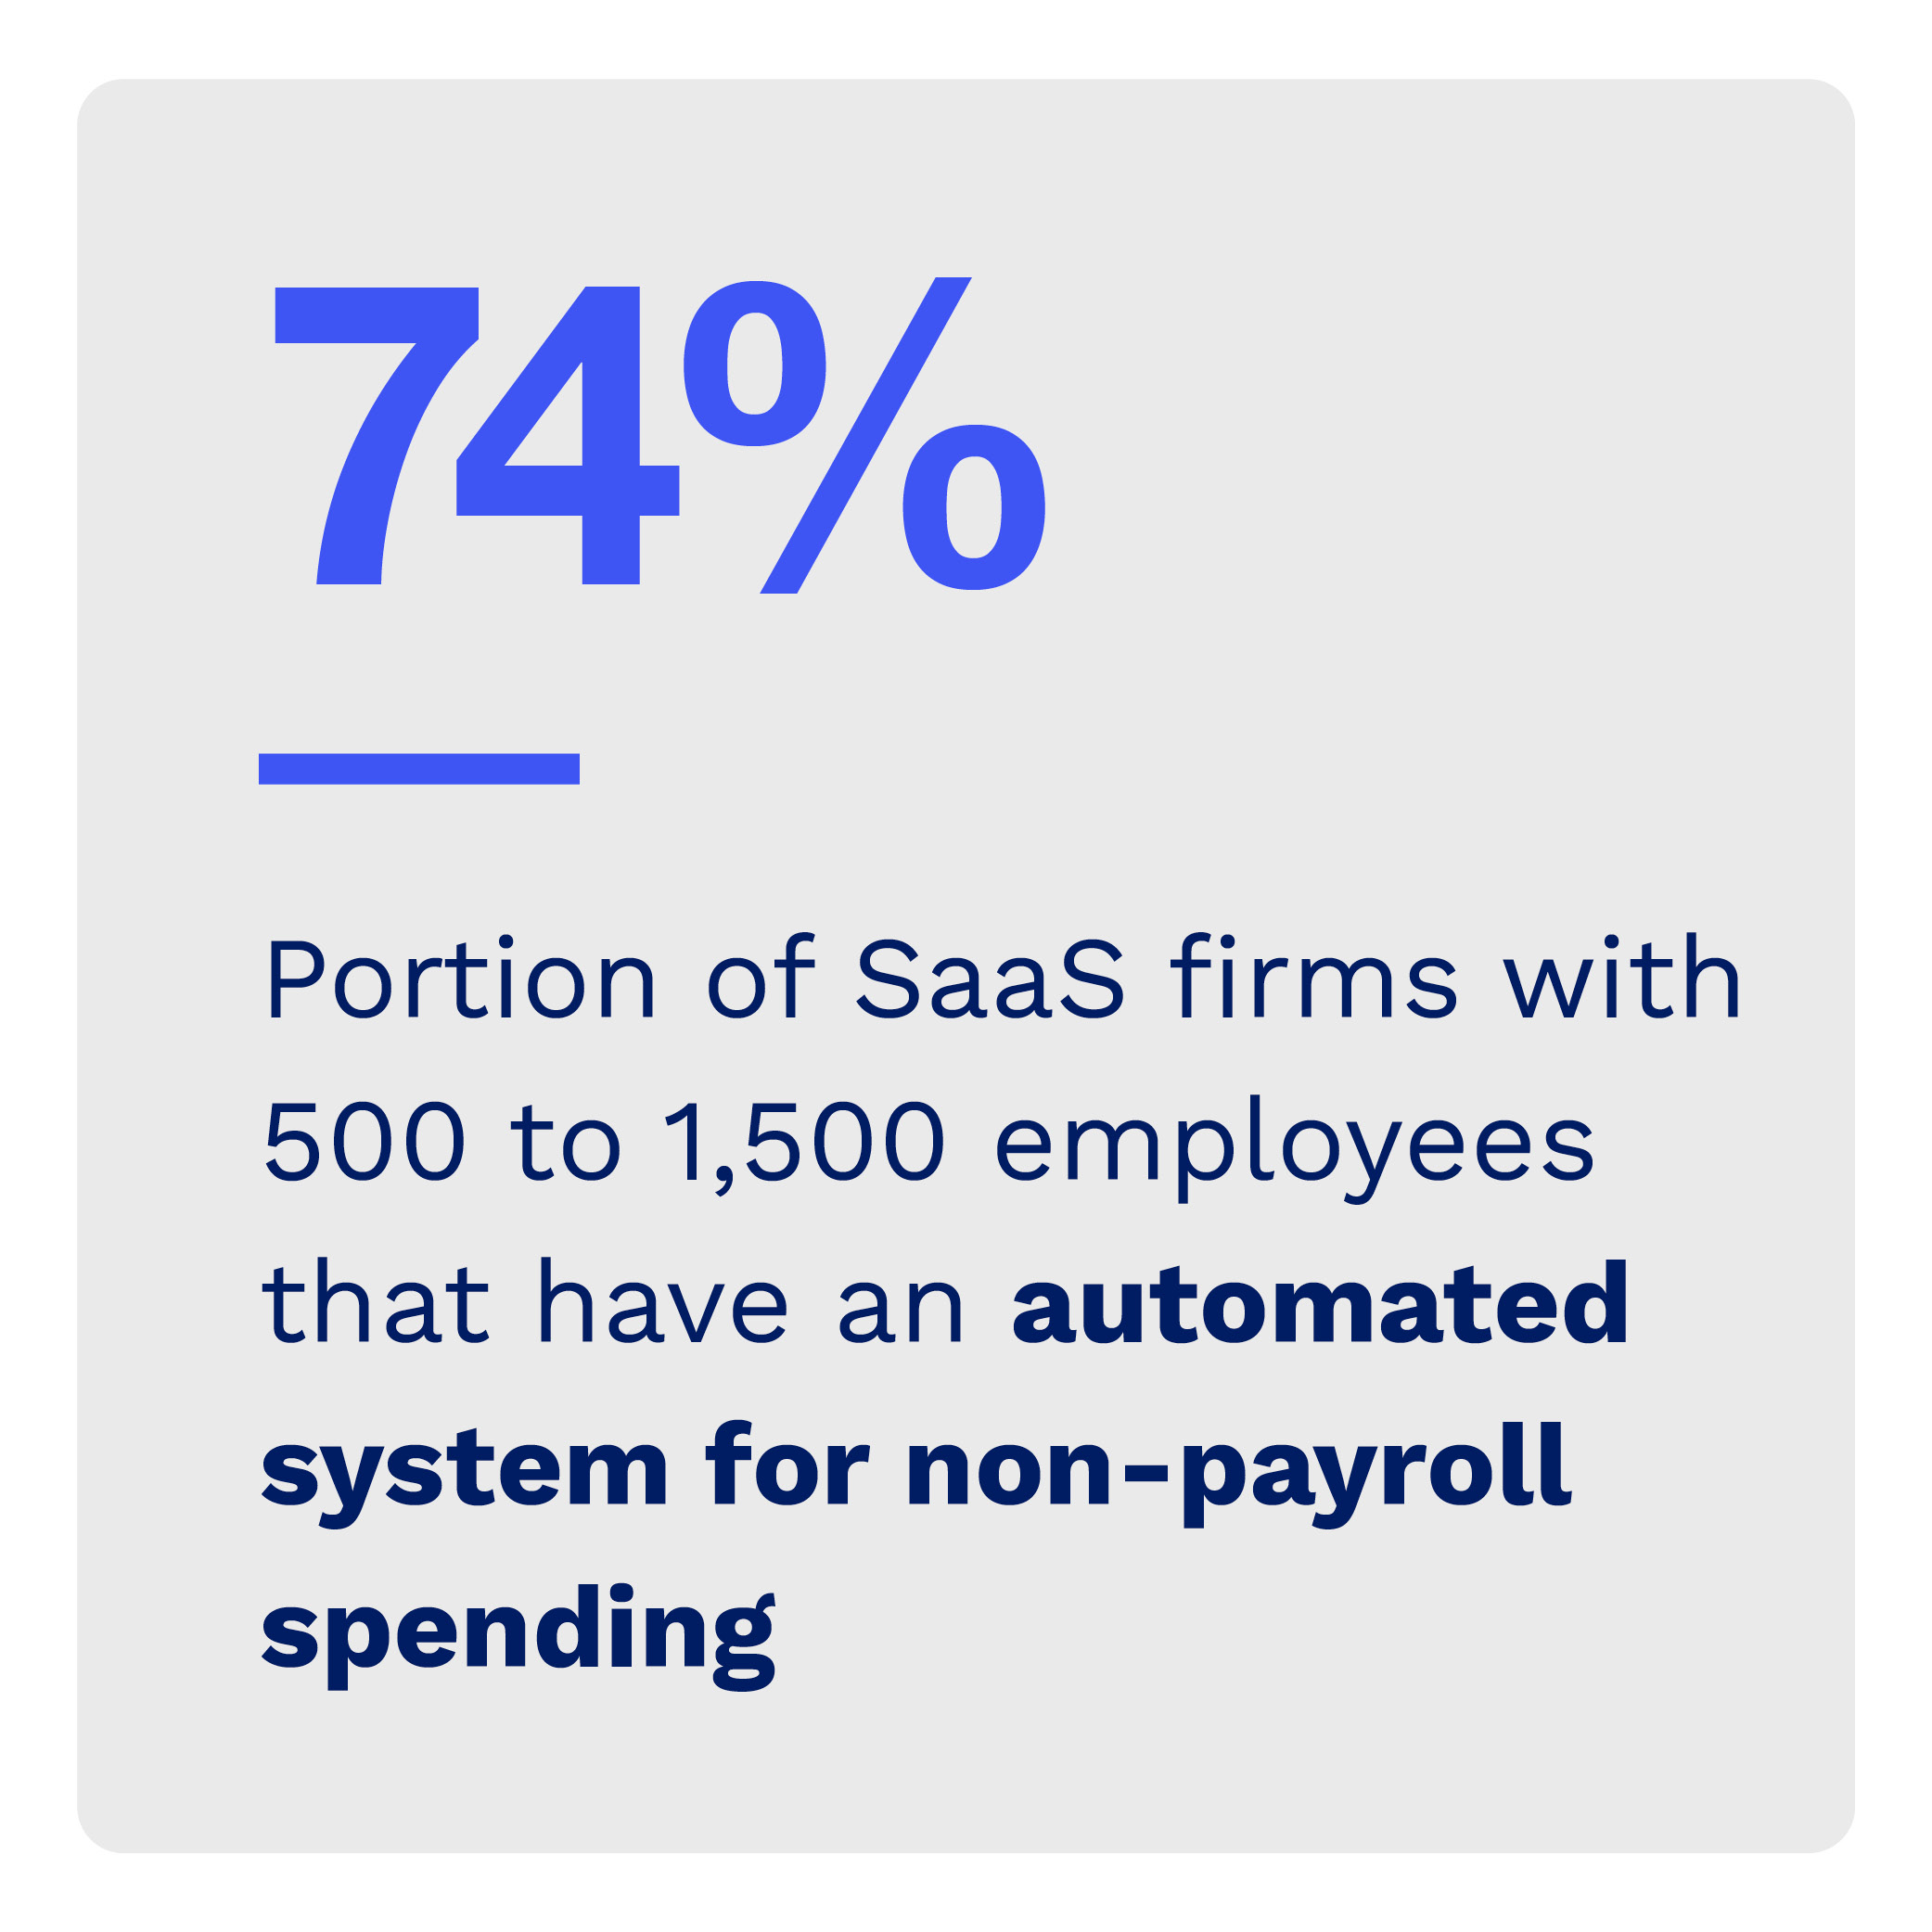 74%: Portion of SaaS firms with 500 to 1,500 employees that have an automated system for non-payroll spending